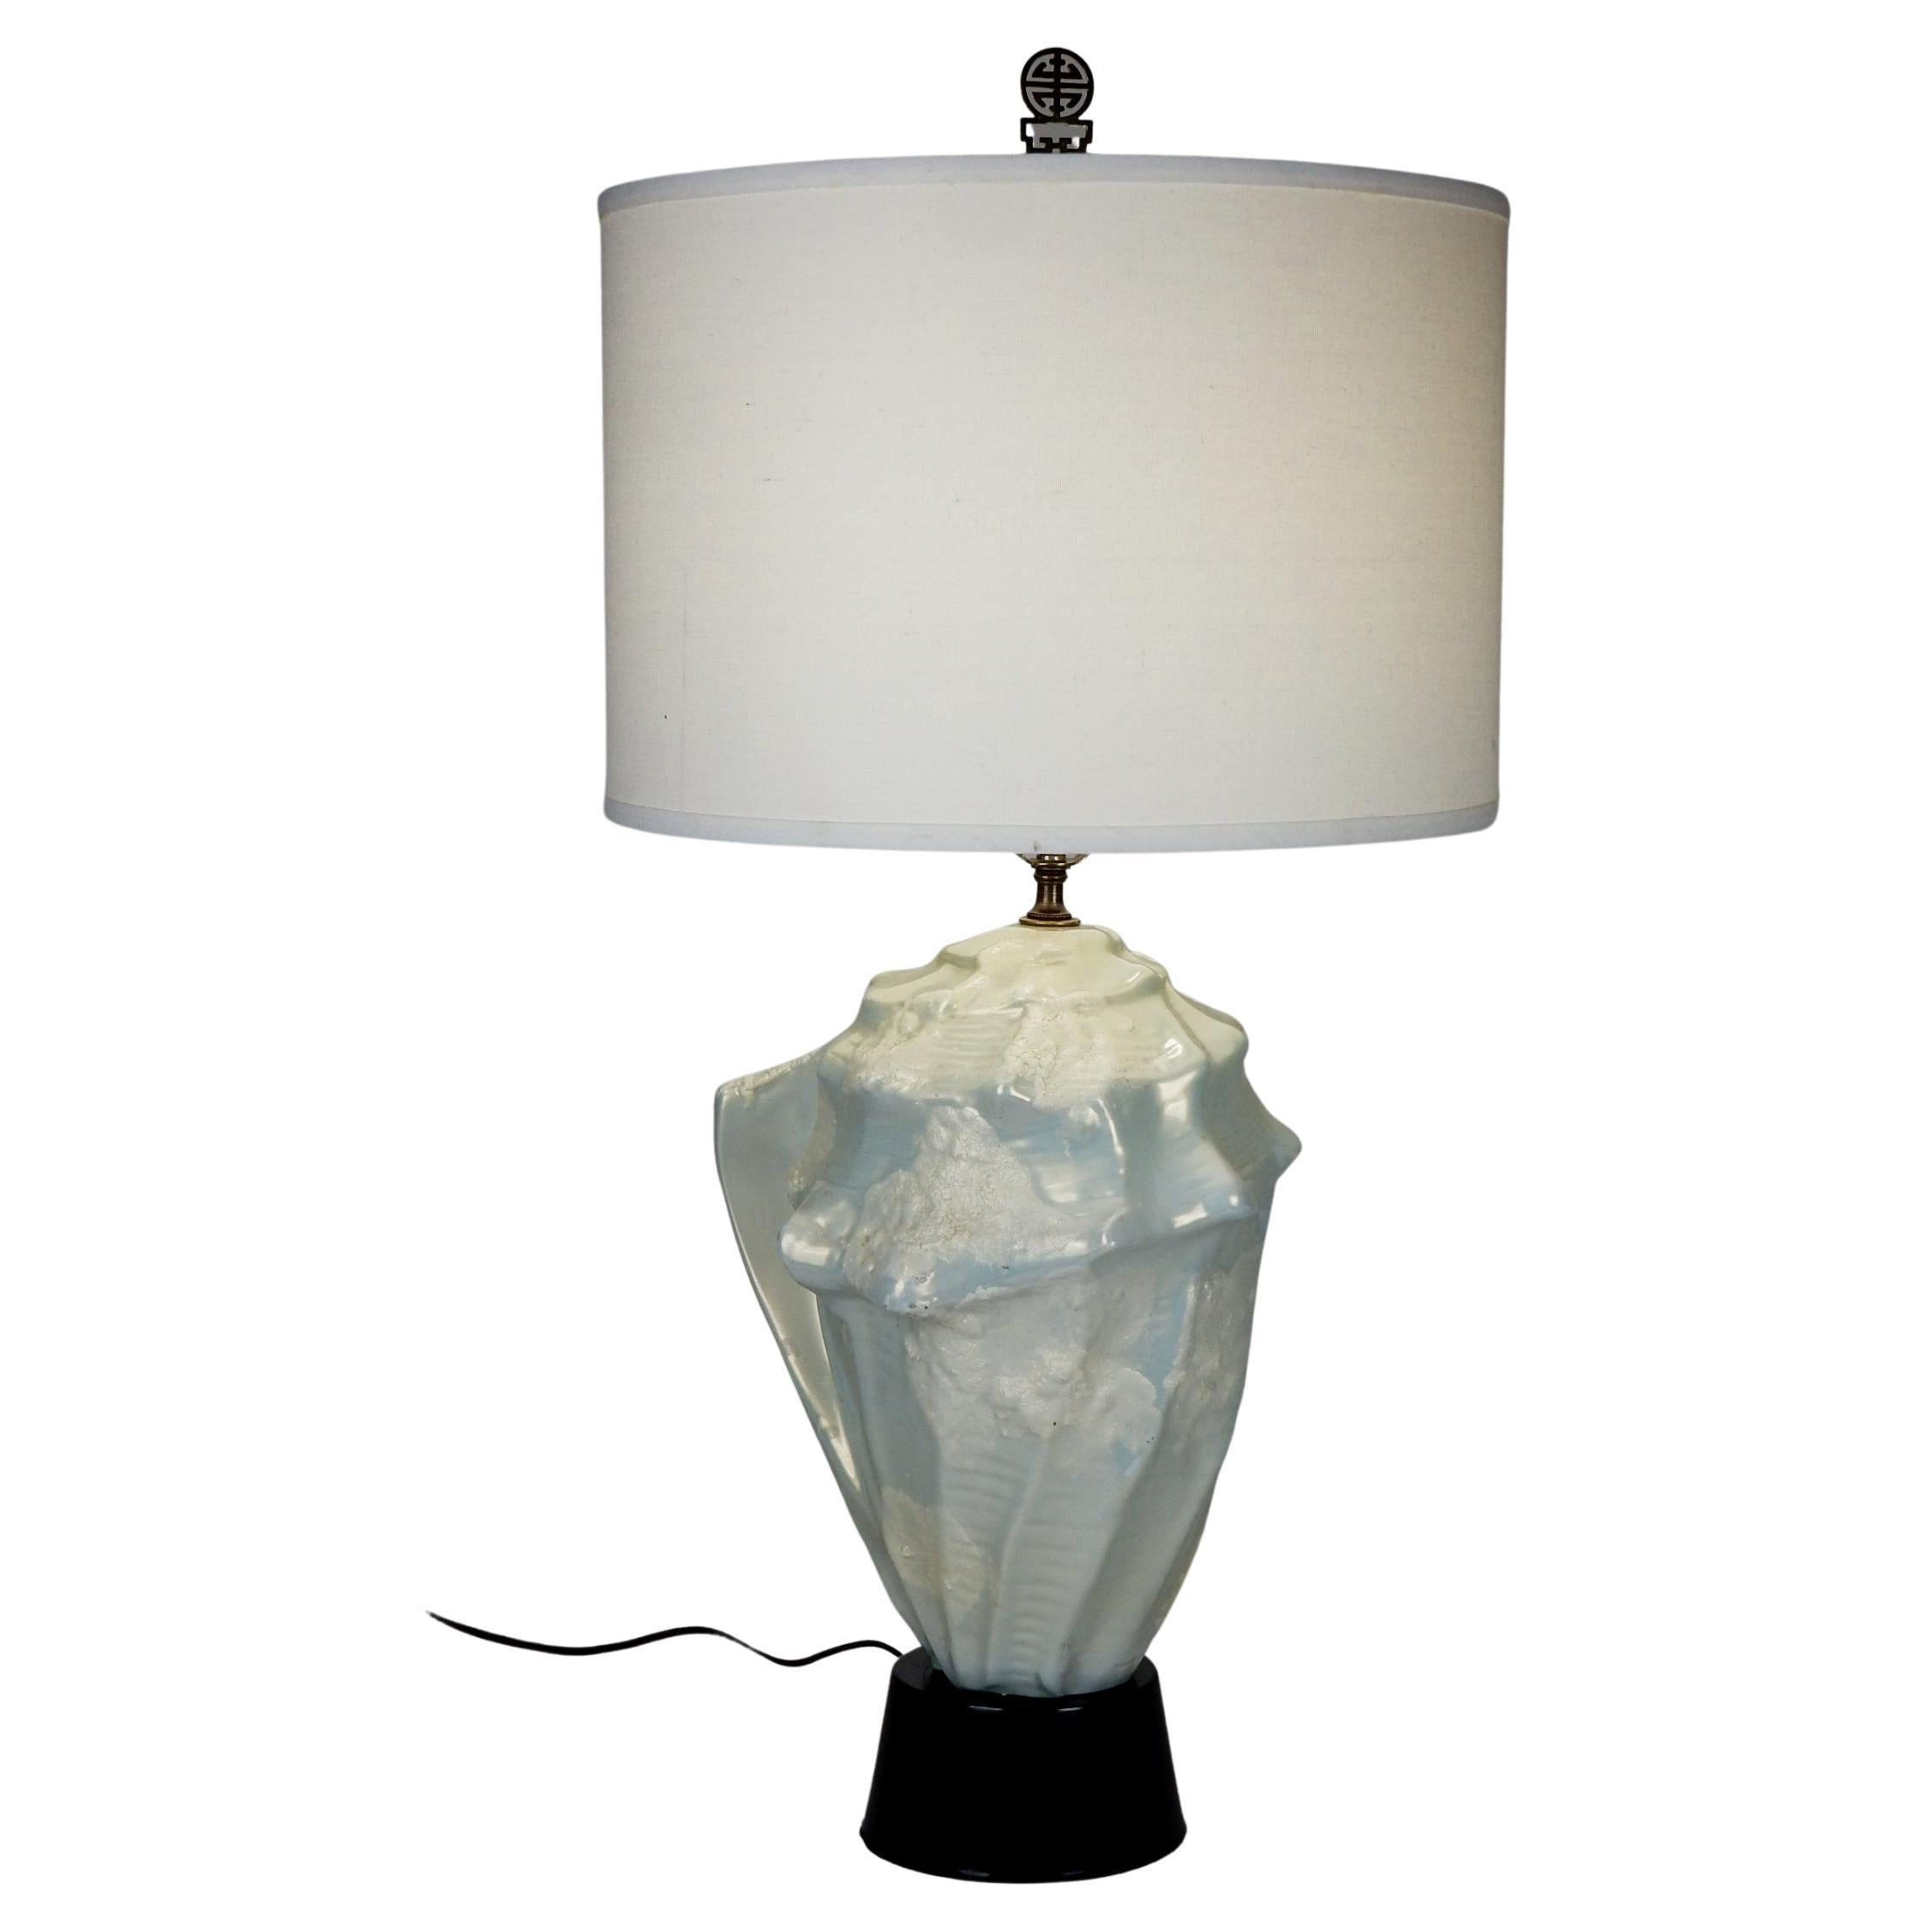 Vintage 1960s Faux Conch Shell Ceramic Table Lamp